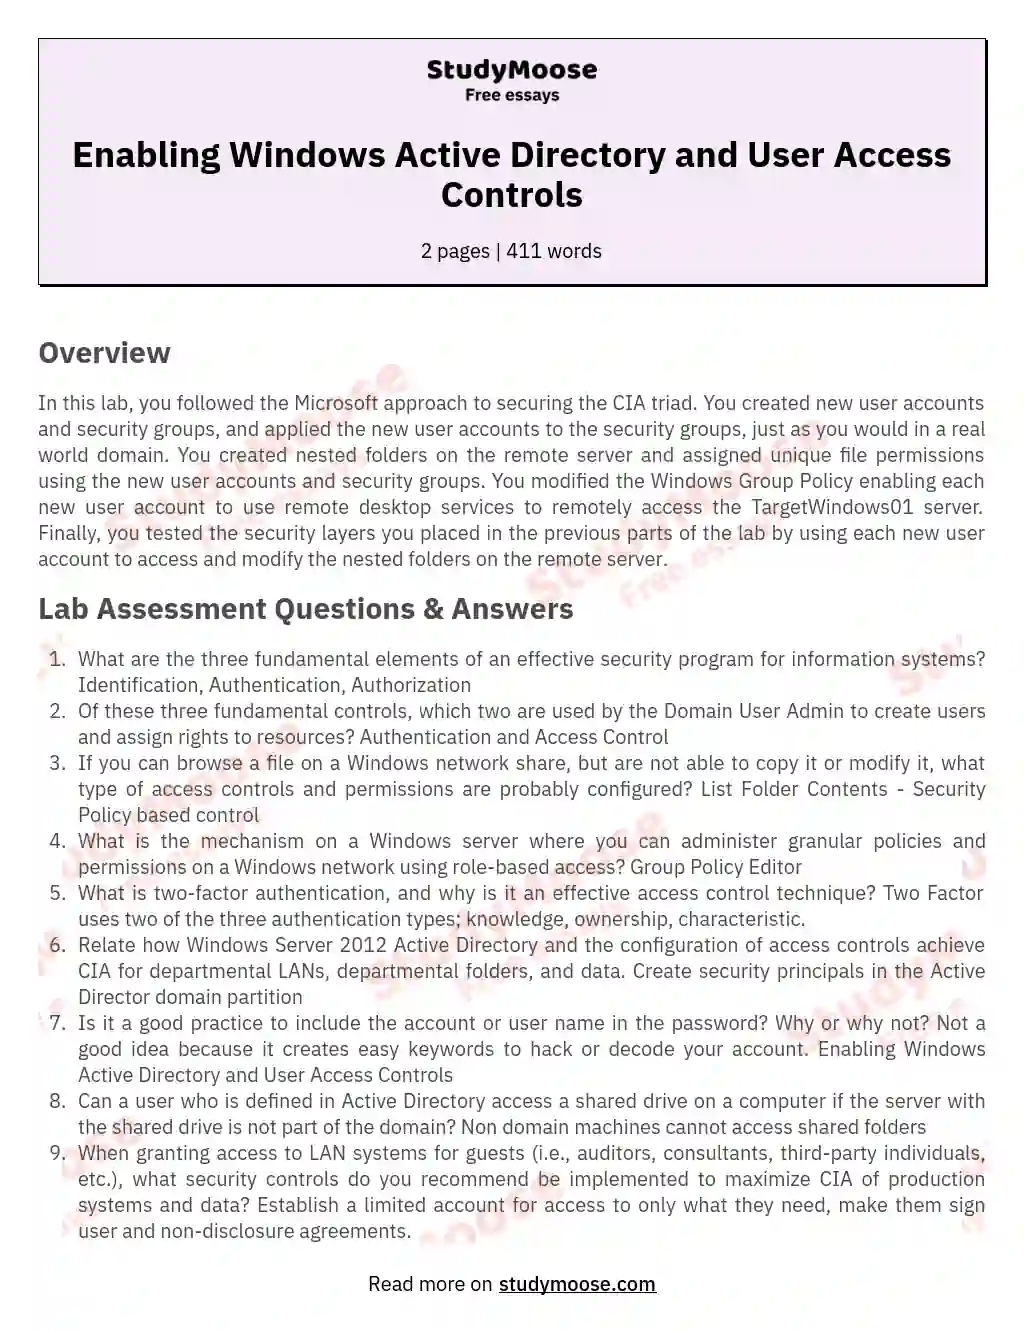 Enabling Windows Active Directory and User Access Controls essay